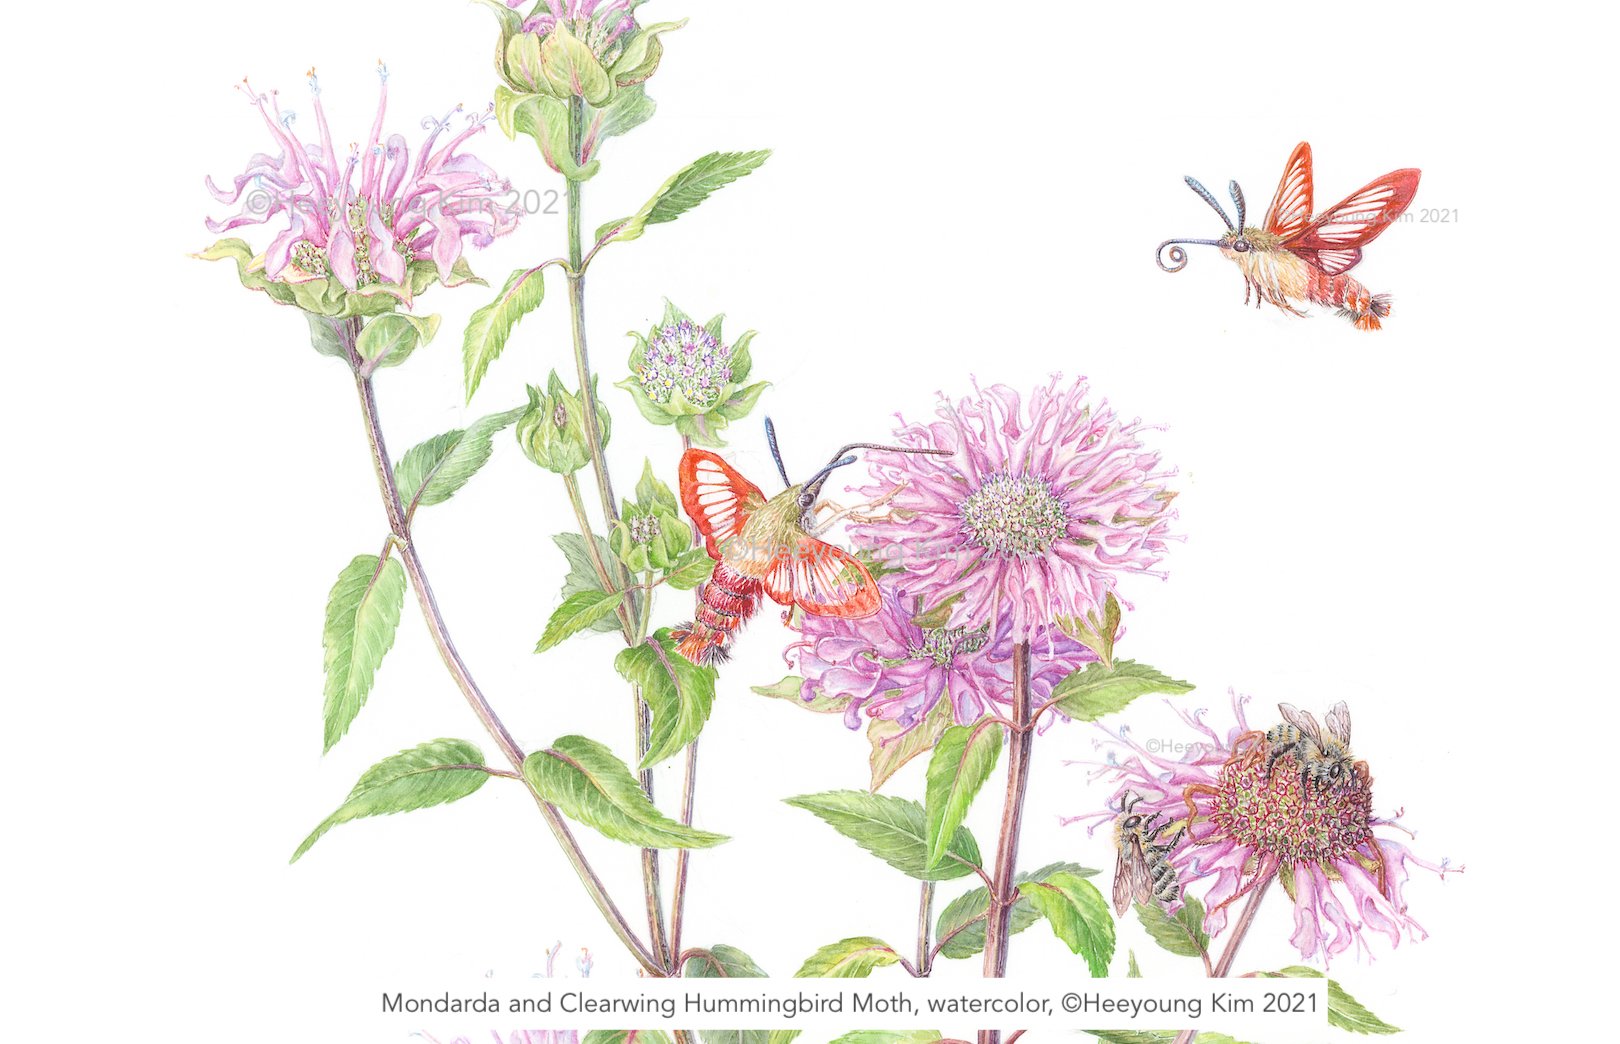 BeeBalm and Clearwing Himmingbird Moth. for slide.jpeg